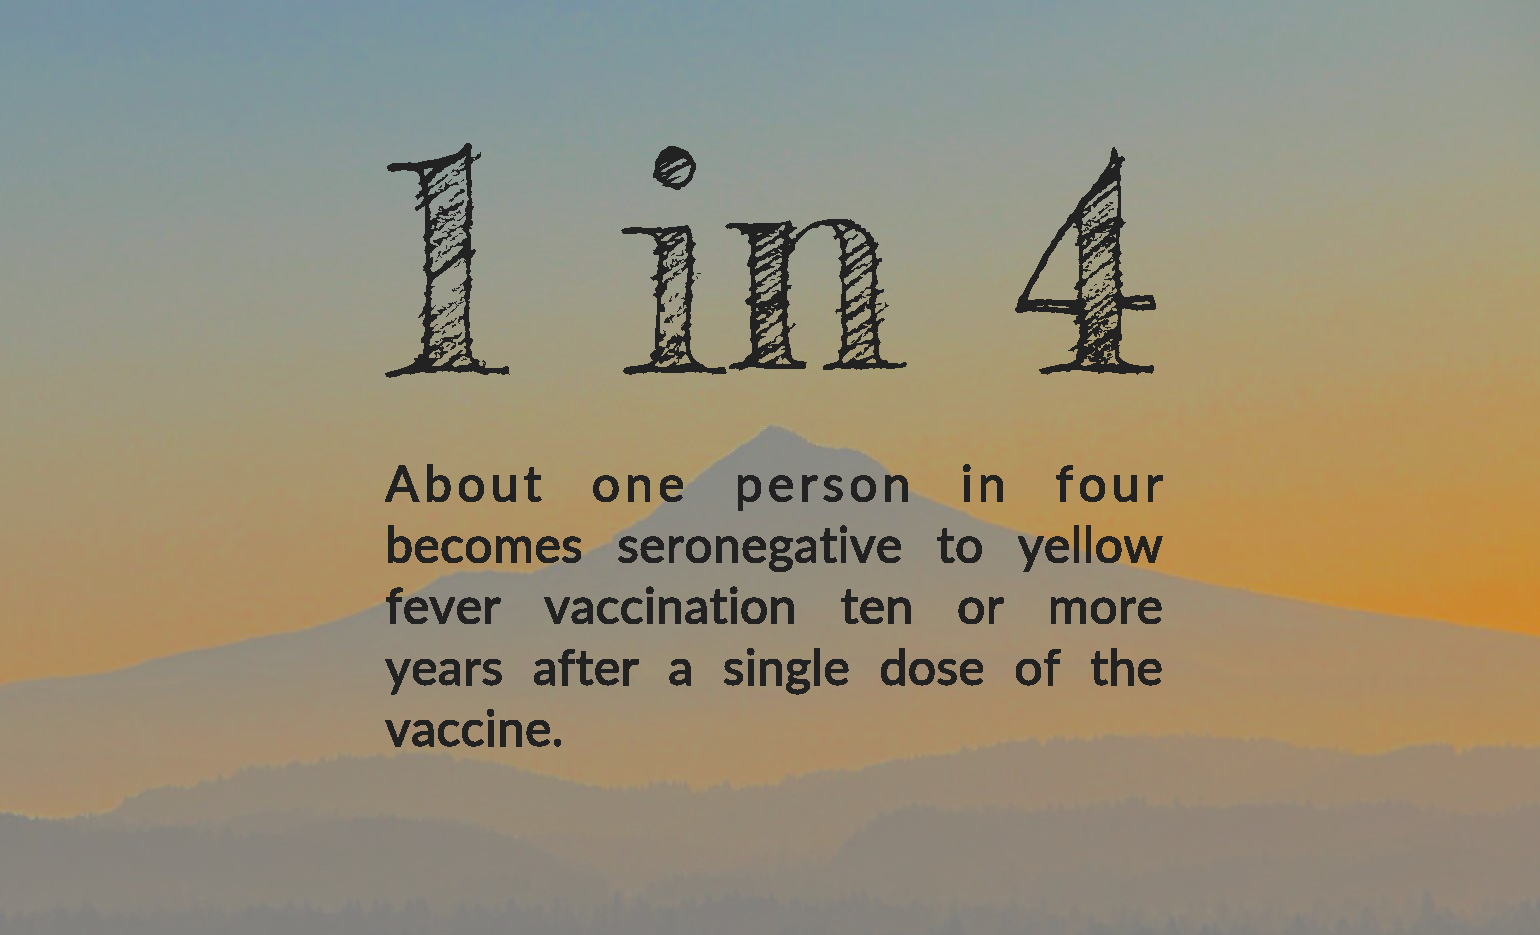 About one person in four becomes seronegative ten years after a single dose of yellow fever vaccine.